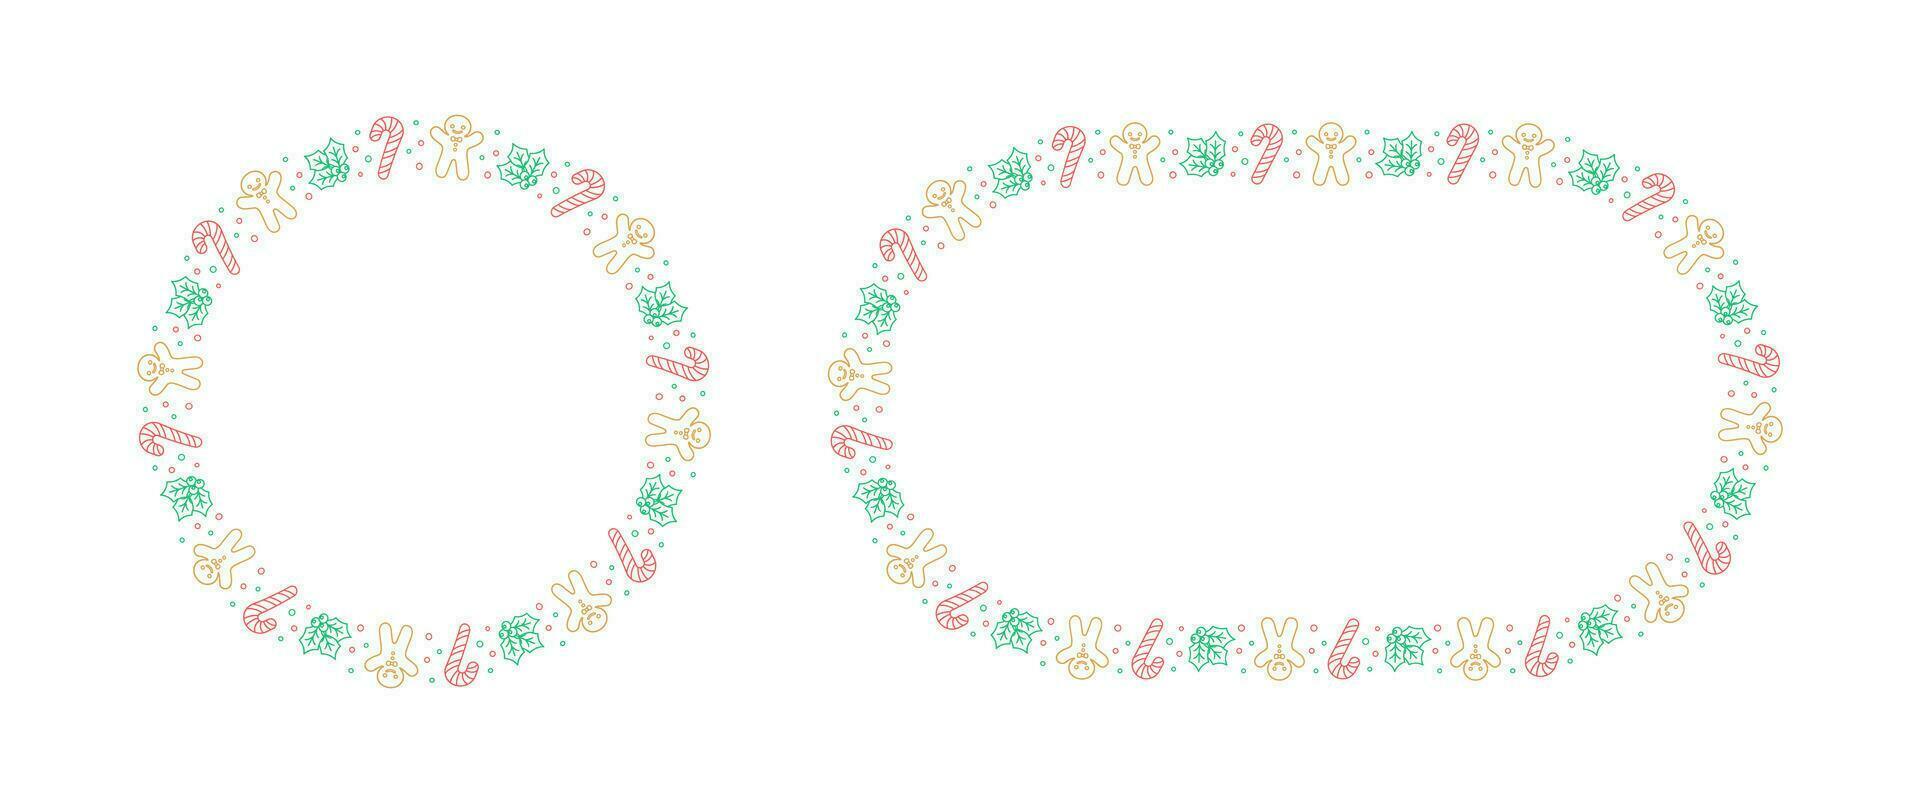 Round Christmas Frame Border set. Gingerbread Cookies, Candy Cane and Mistletoe Pattern Winter Holiday Graphics. Social media post template on white background. Vector illustration.